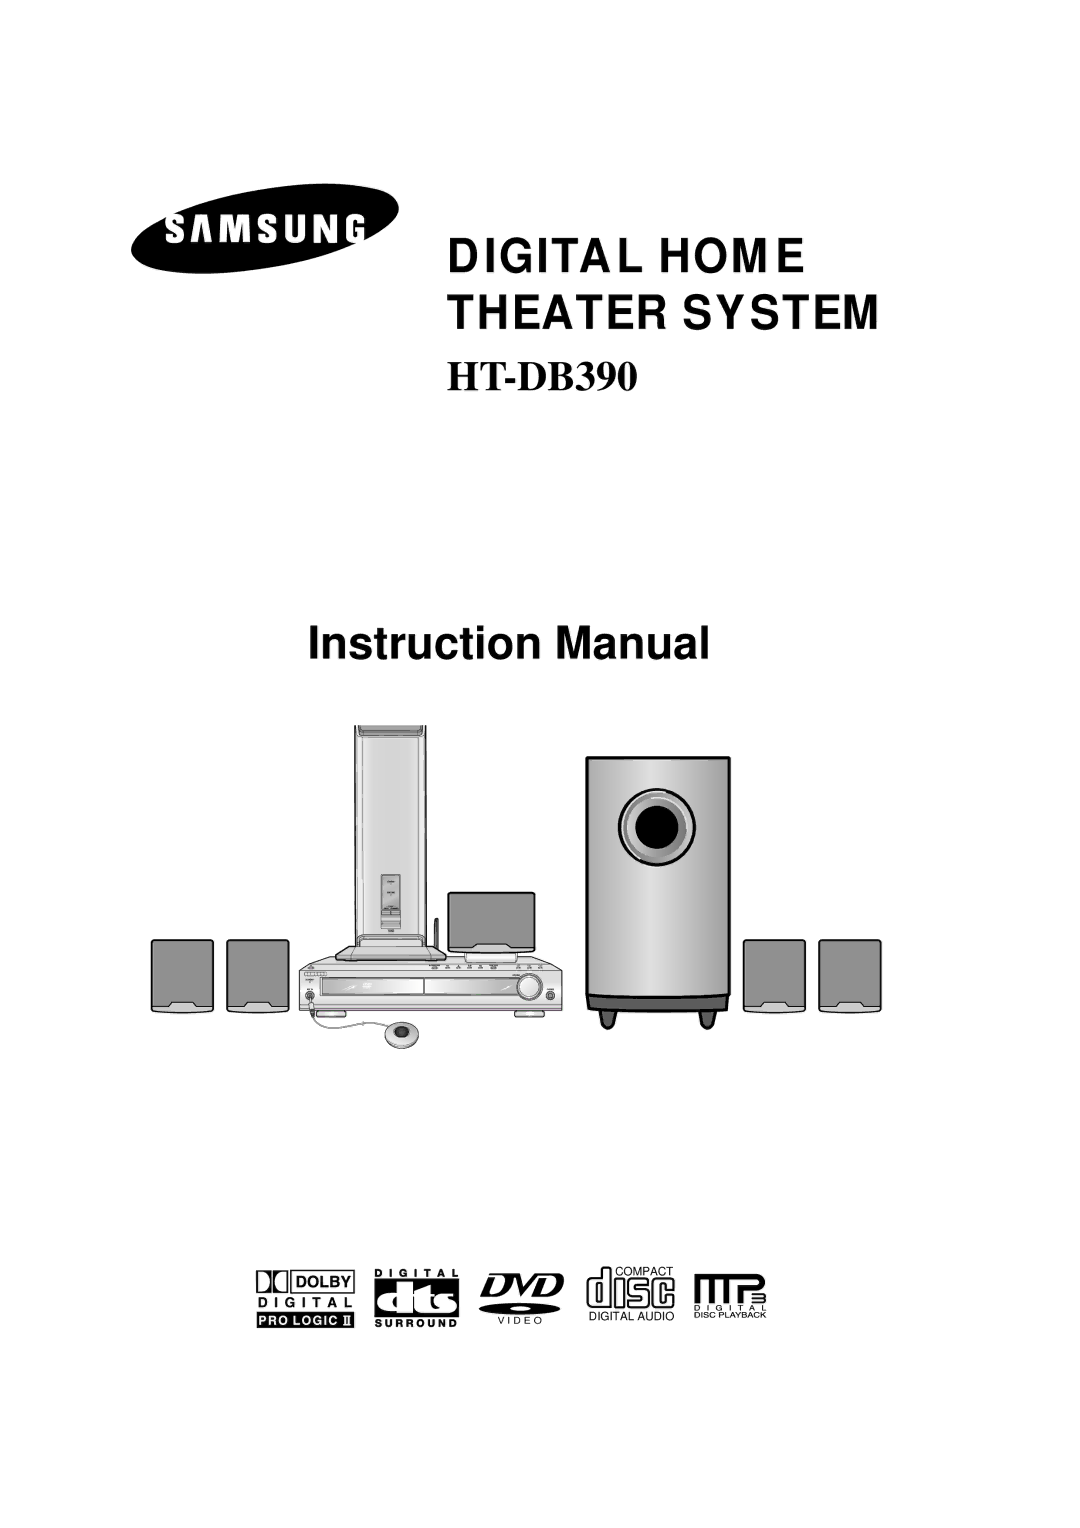 Samsung HT-DB390 instruction manual Digital Home Theater System 